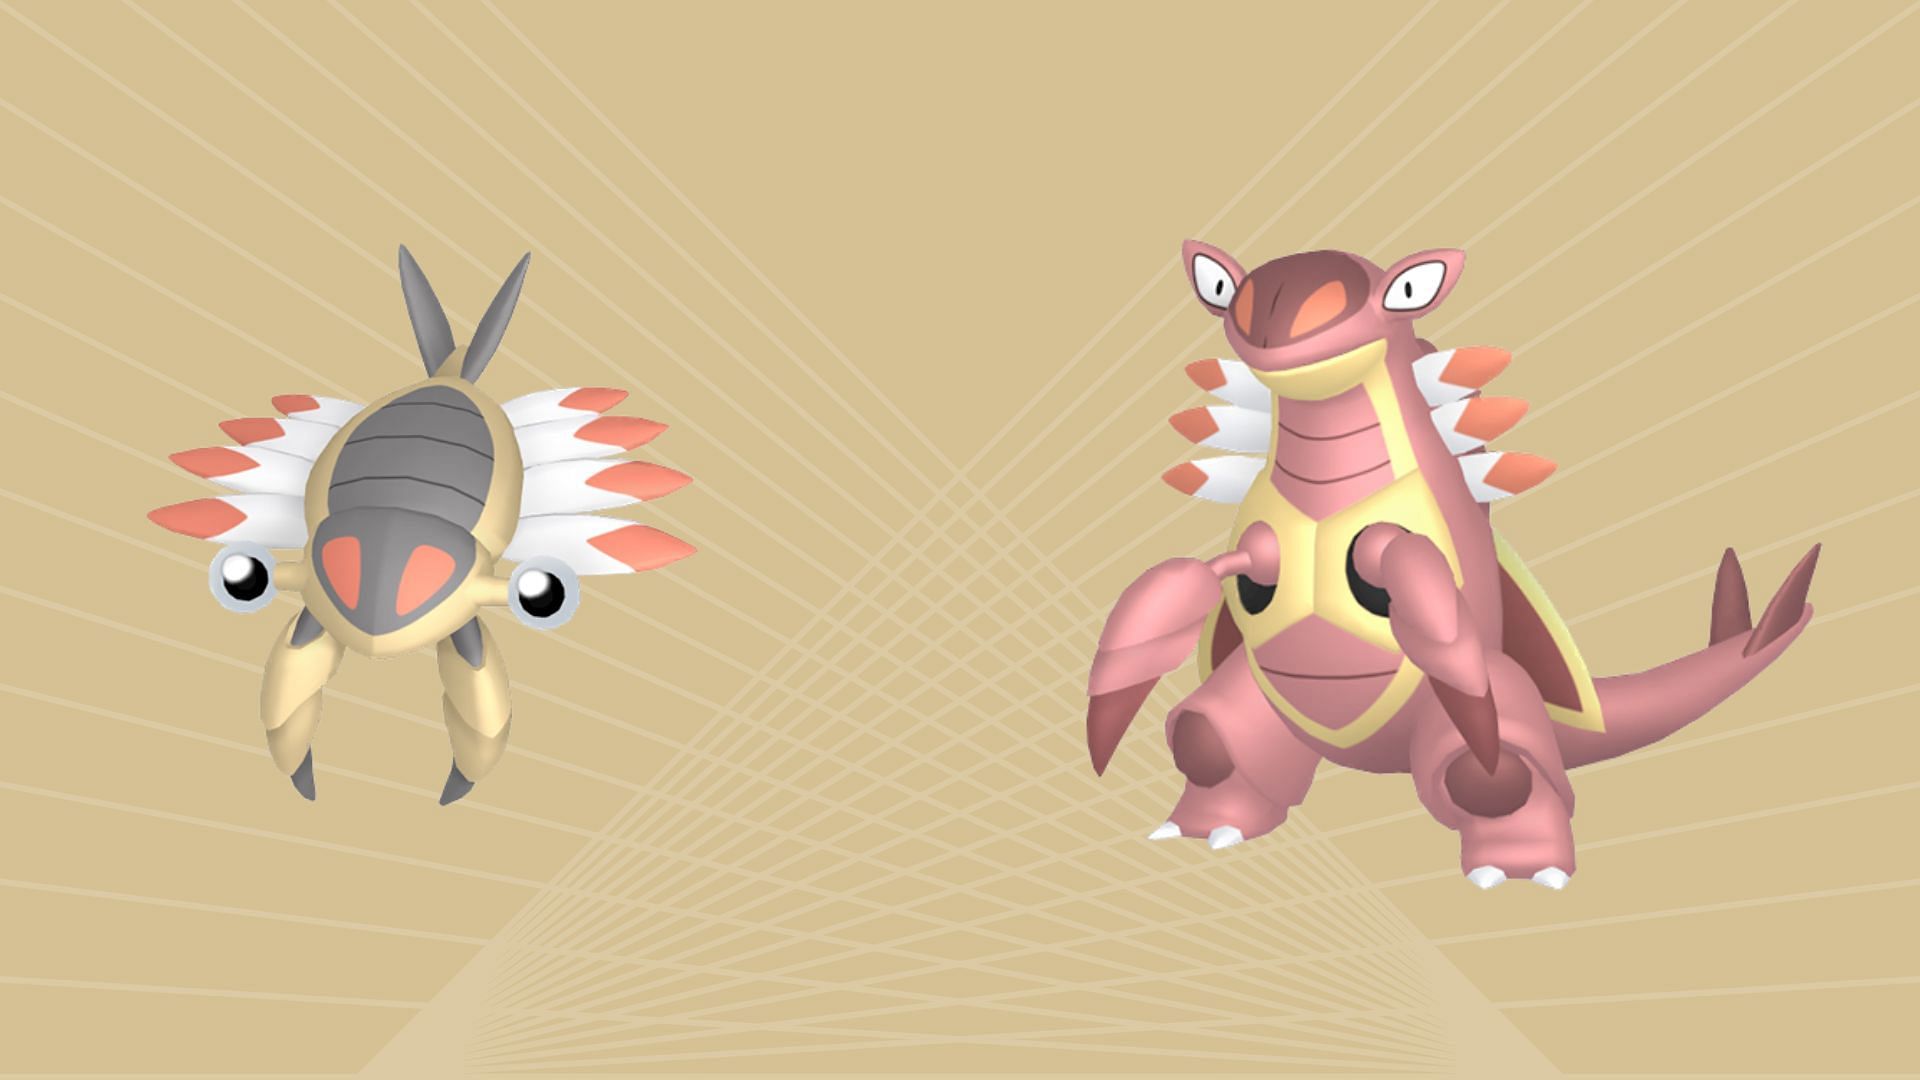 All Shiny Fossil Pokemon in Pokemon GO, ranked from worst to best